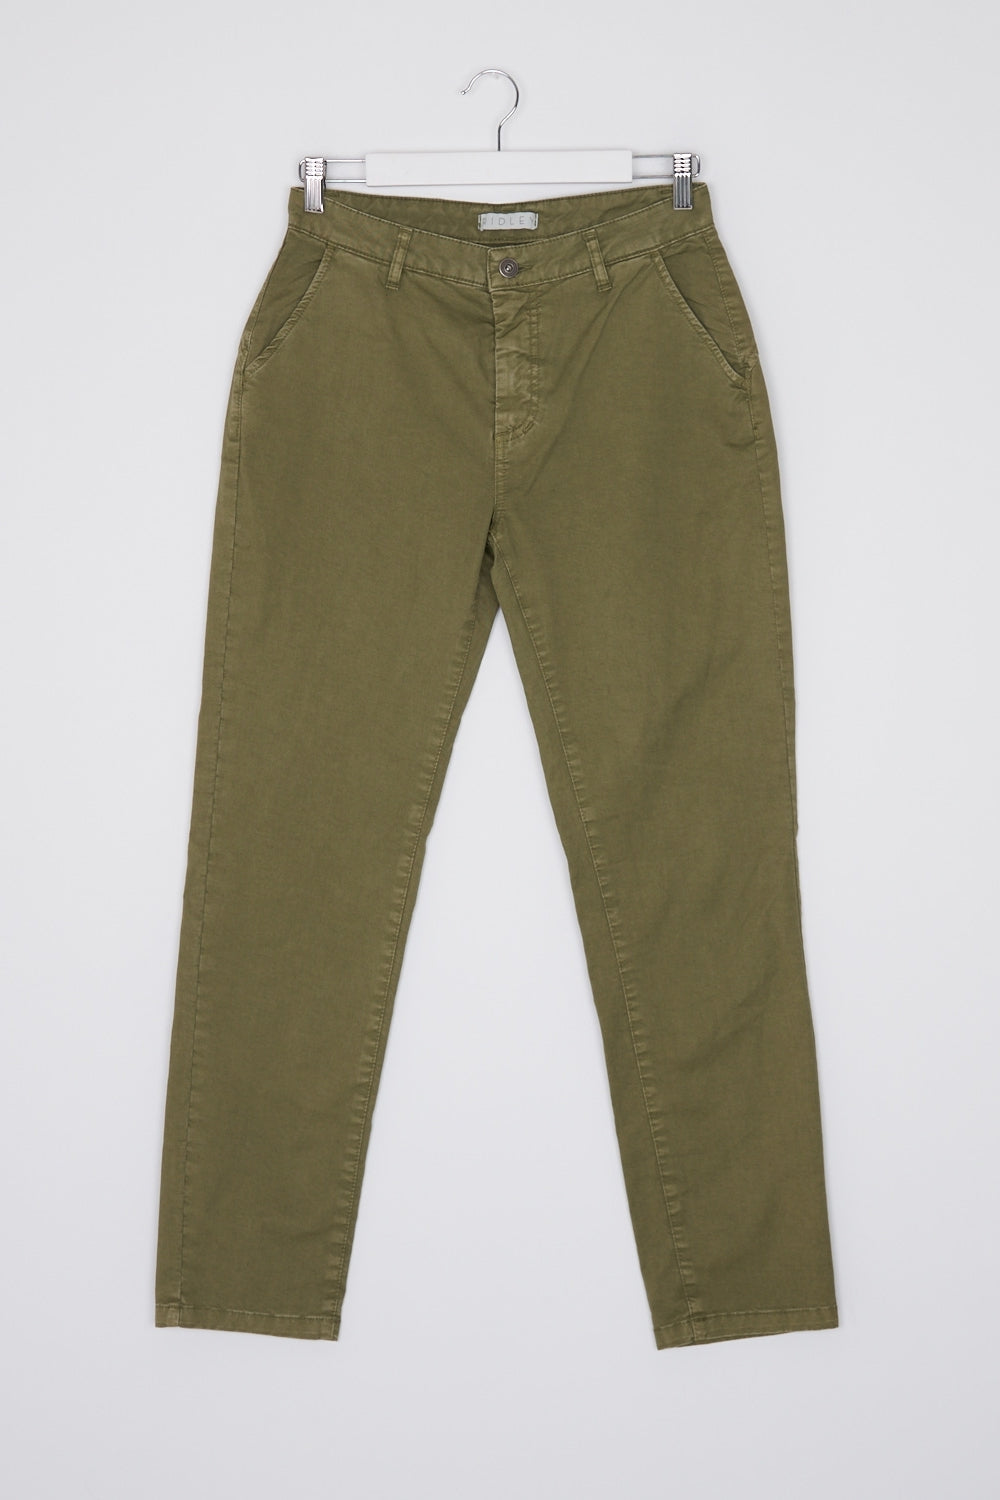 Ridley Green Cargo Jeans M